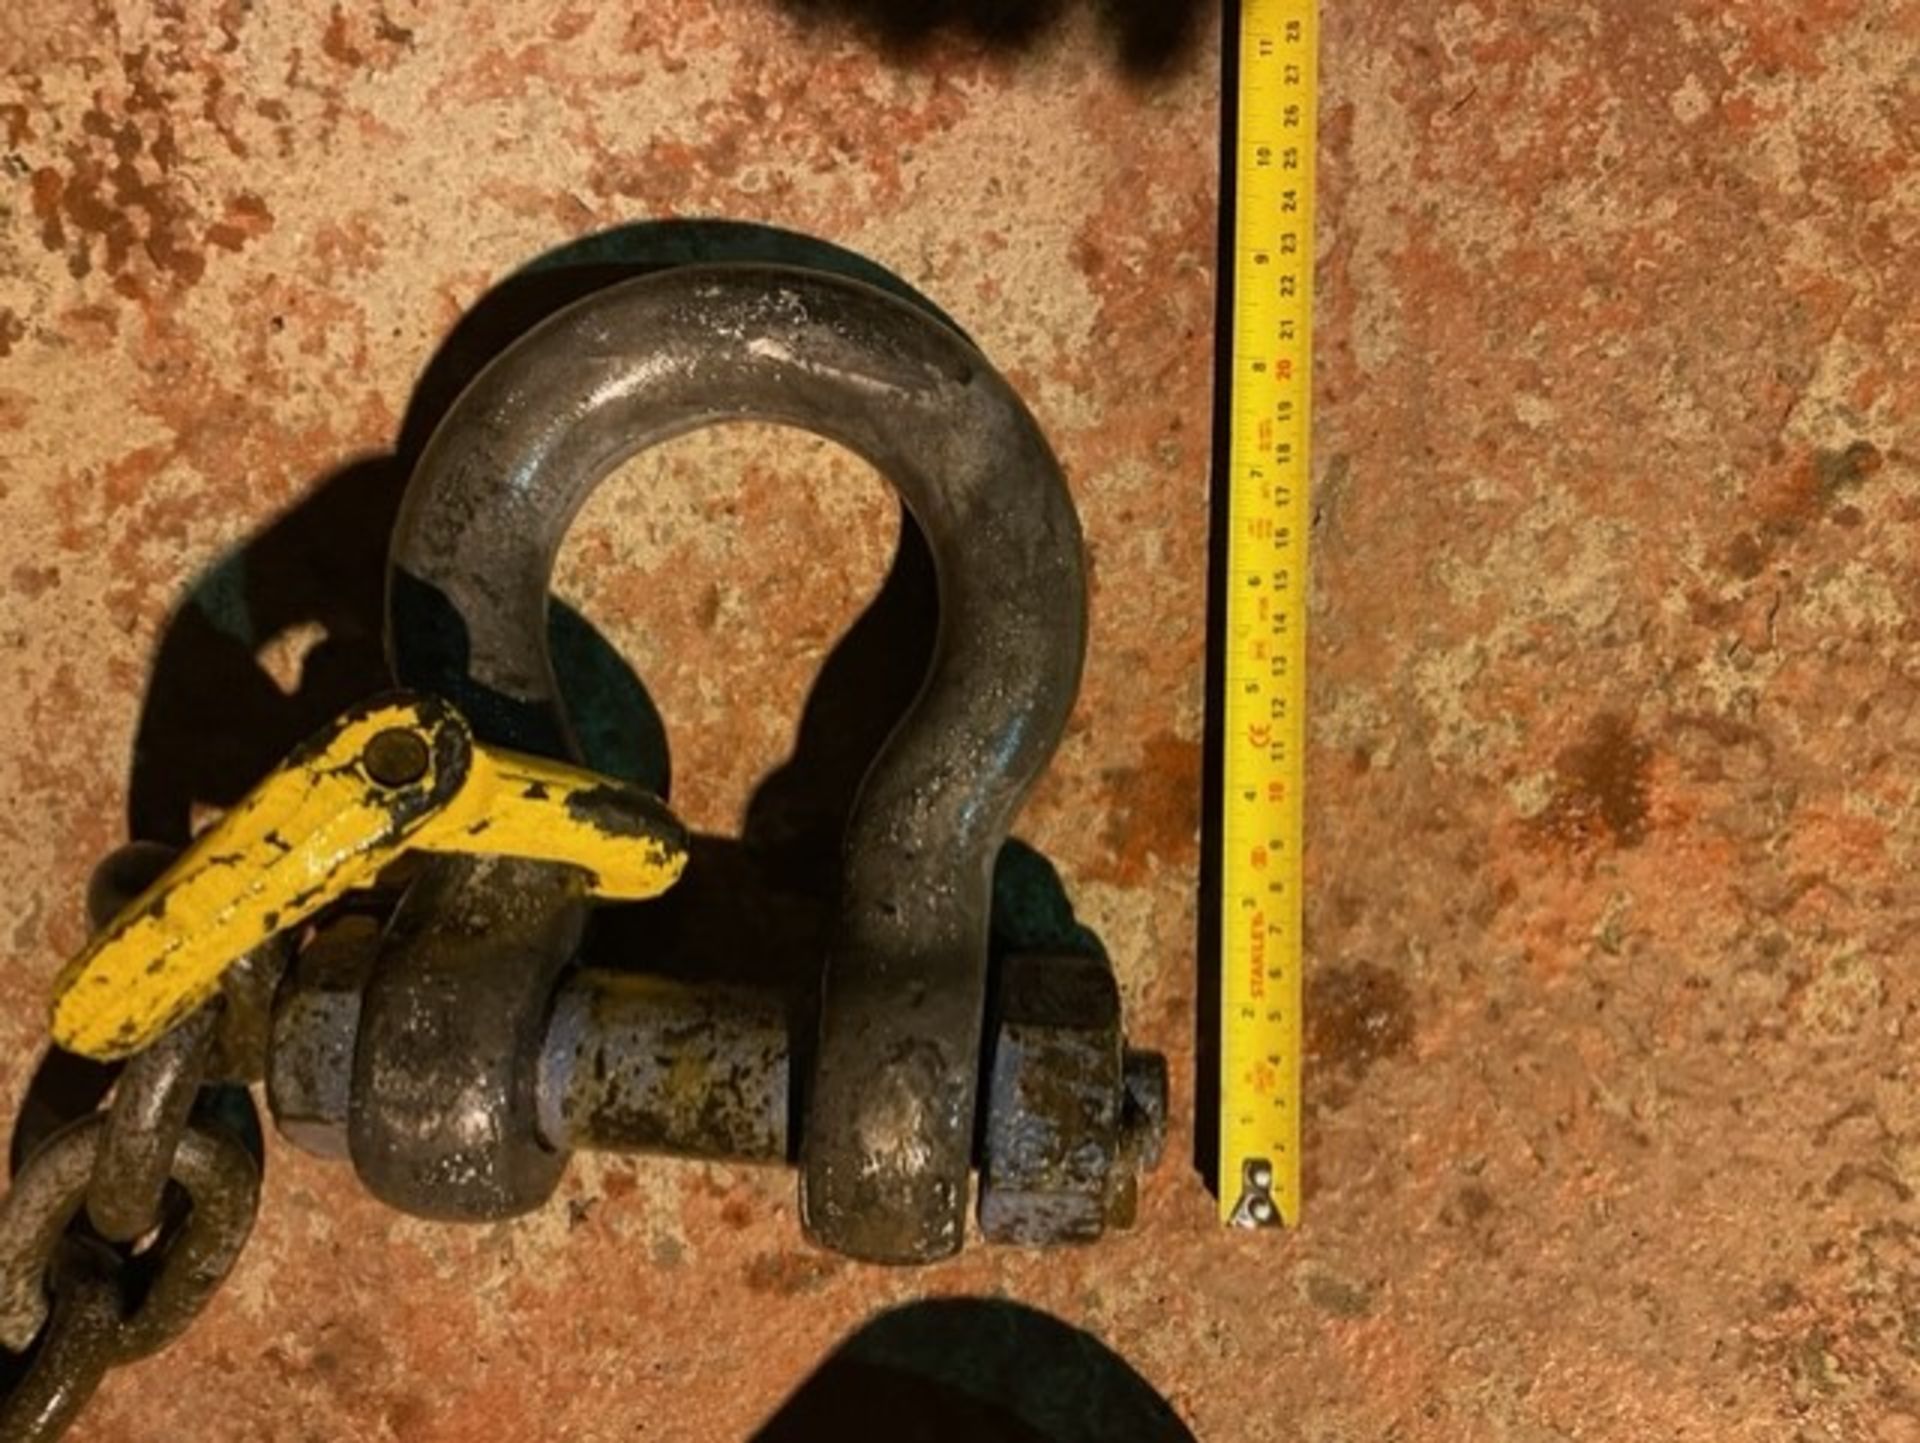 Drop chain large with u bolt and 2 smaller u bolts - Image 4 of 4